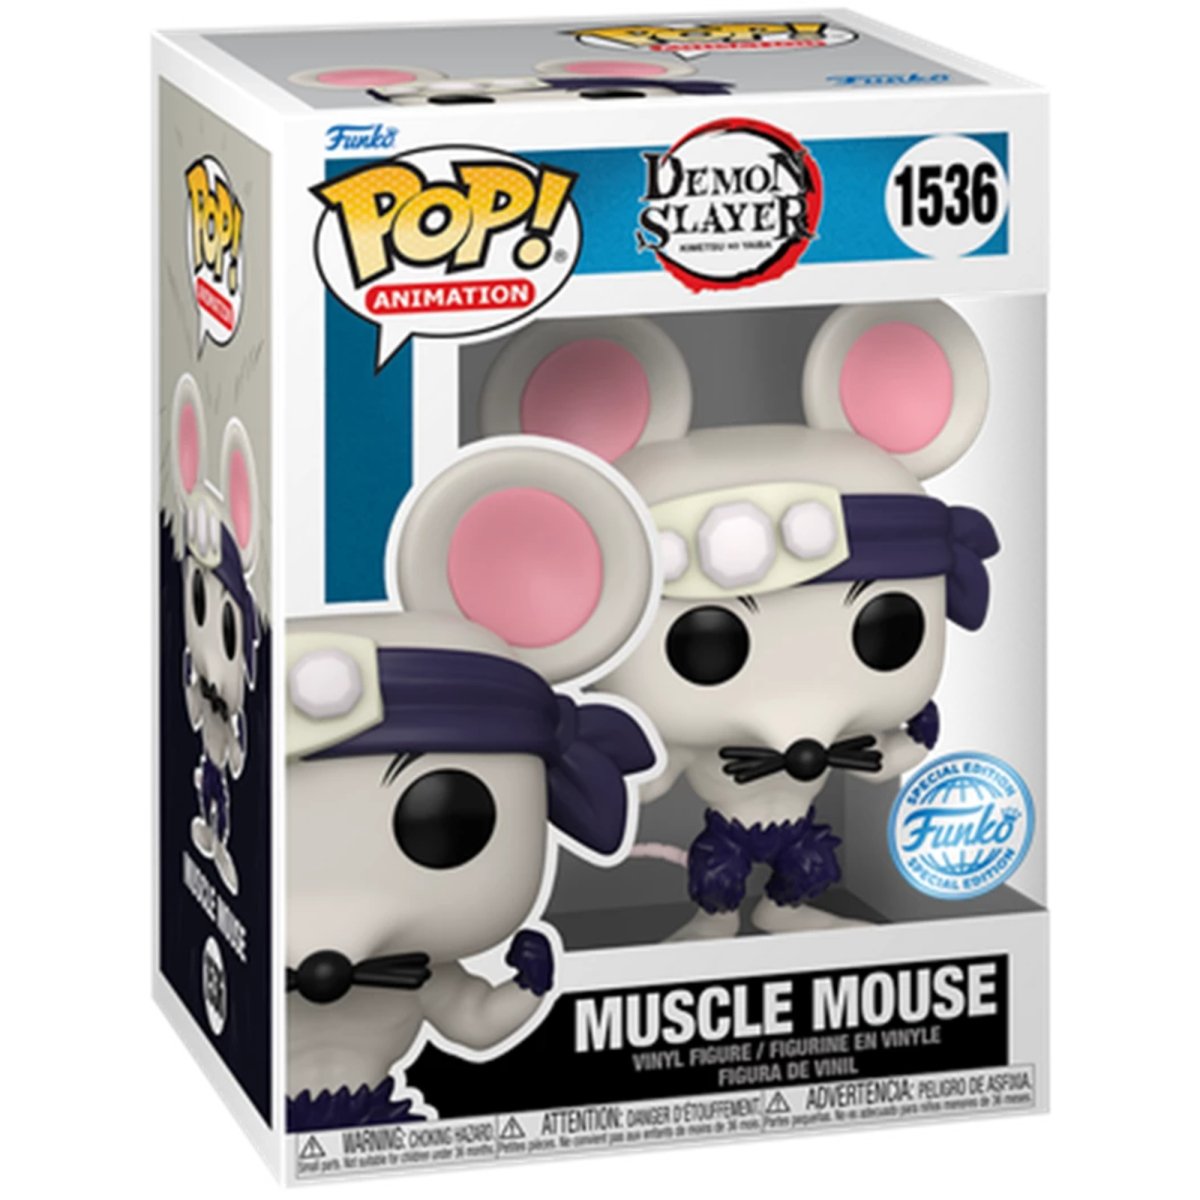 Demon Slayer - Muscle Mouse (Special Edition) #1536 - Funko Pop! Vinyl Anime - Persona Toys